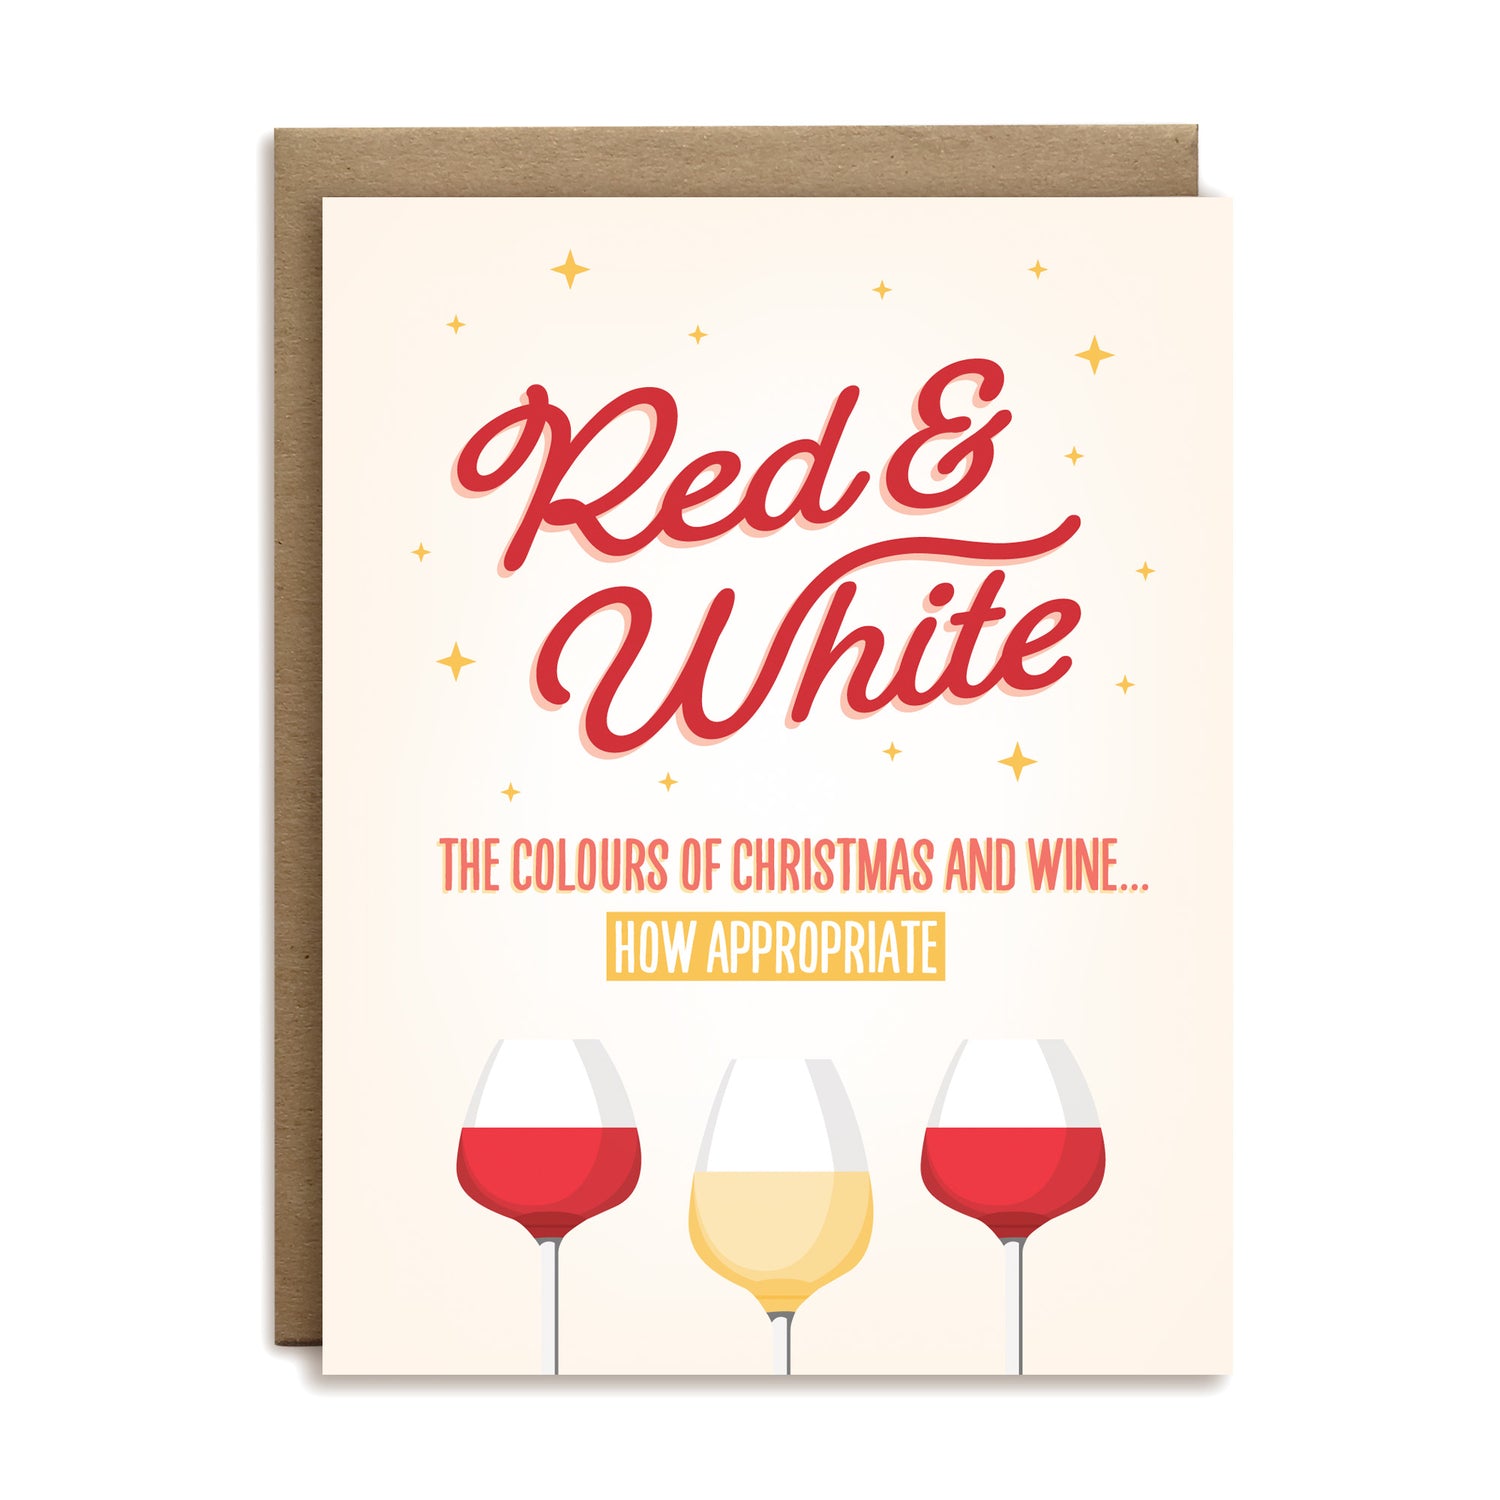 Red and white, the colours of christmas and wine, how appropriate holiday greeting card by I’ll Know It When I See It